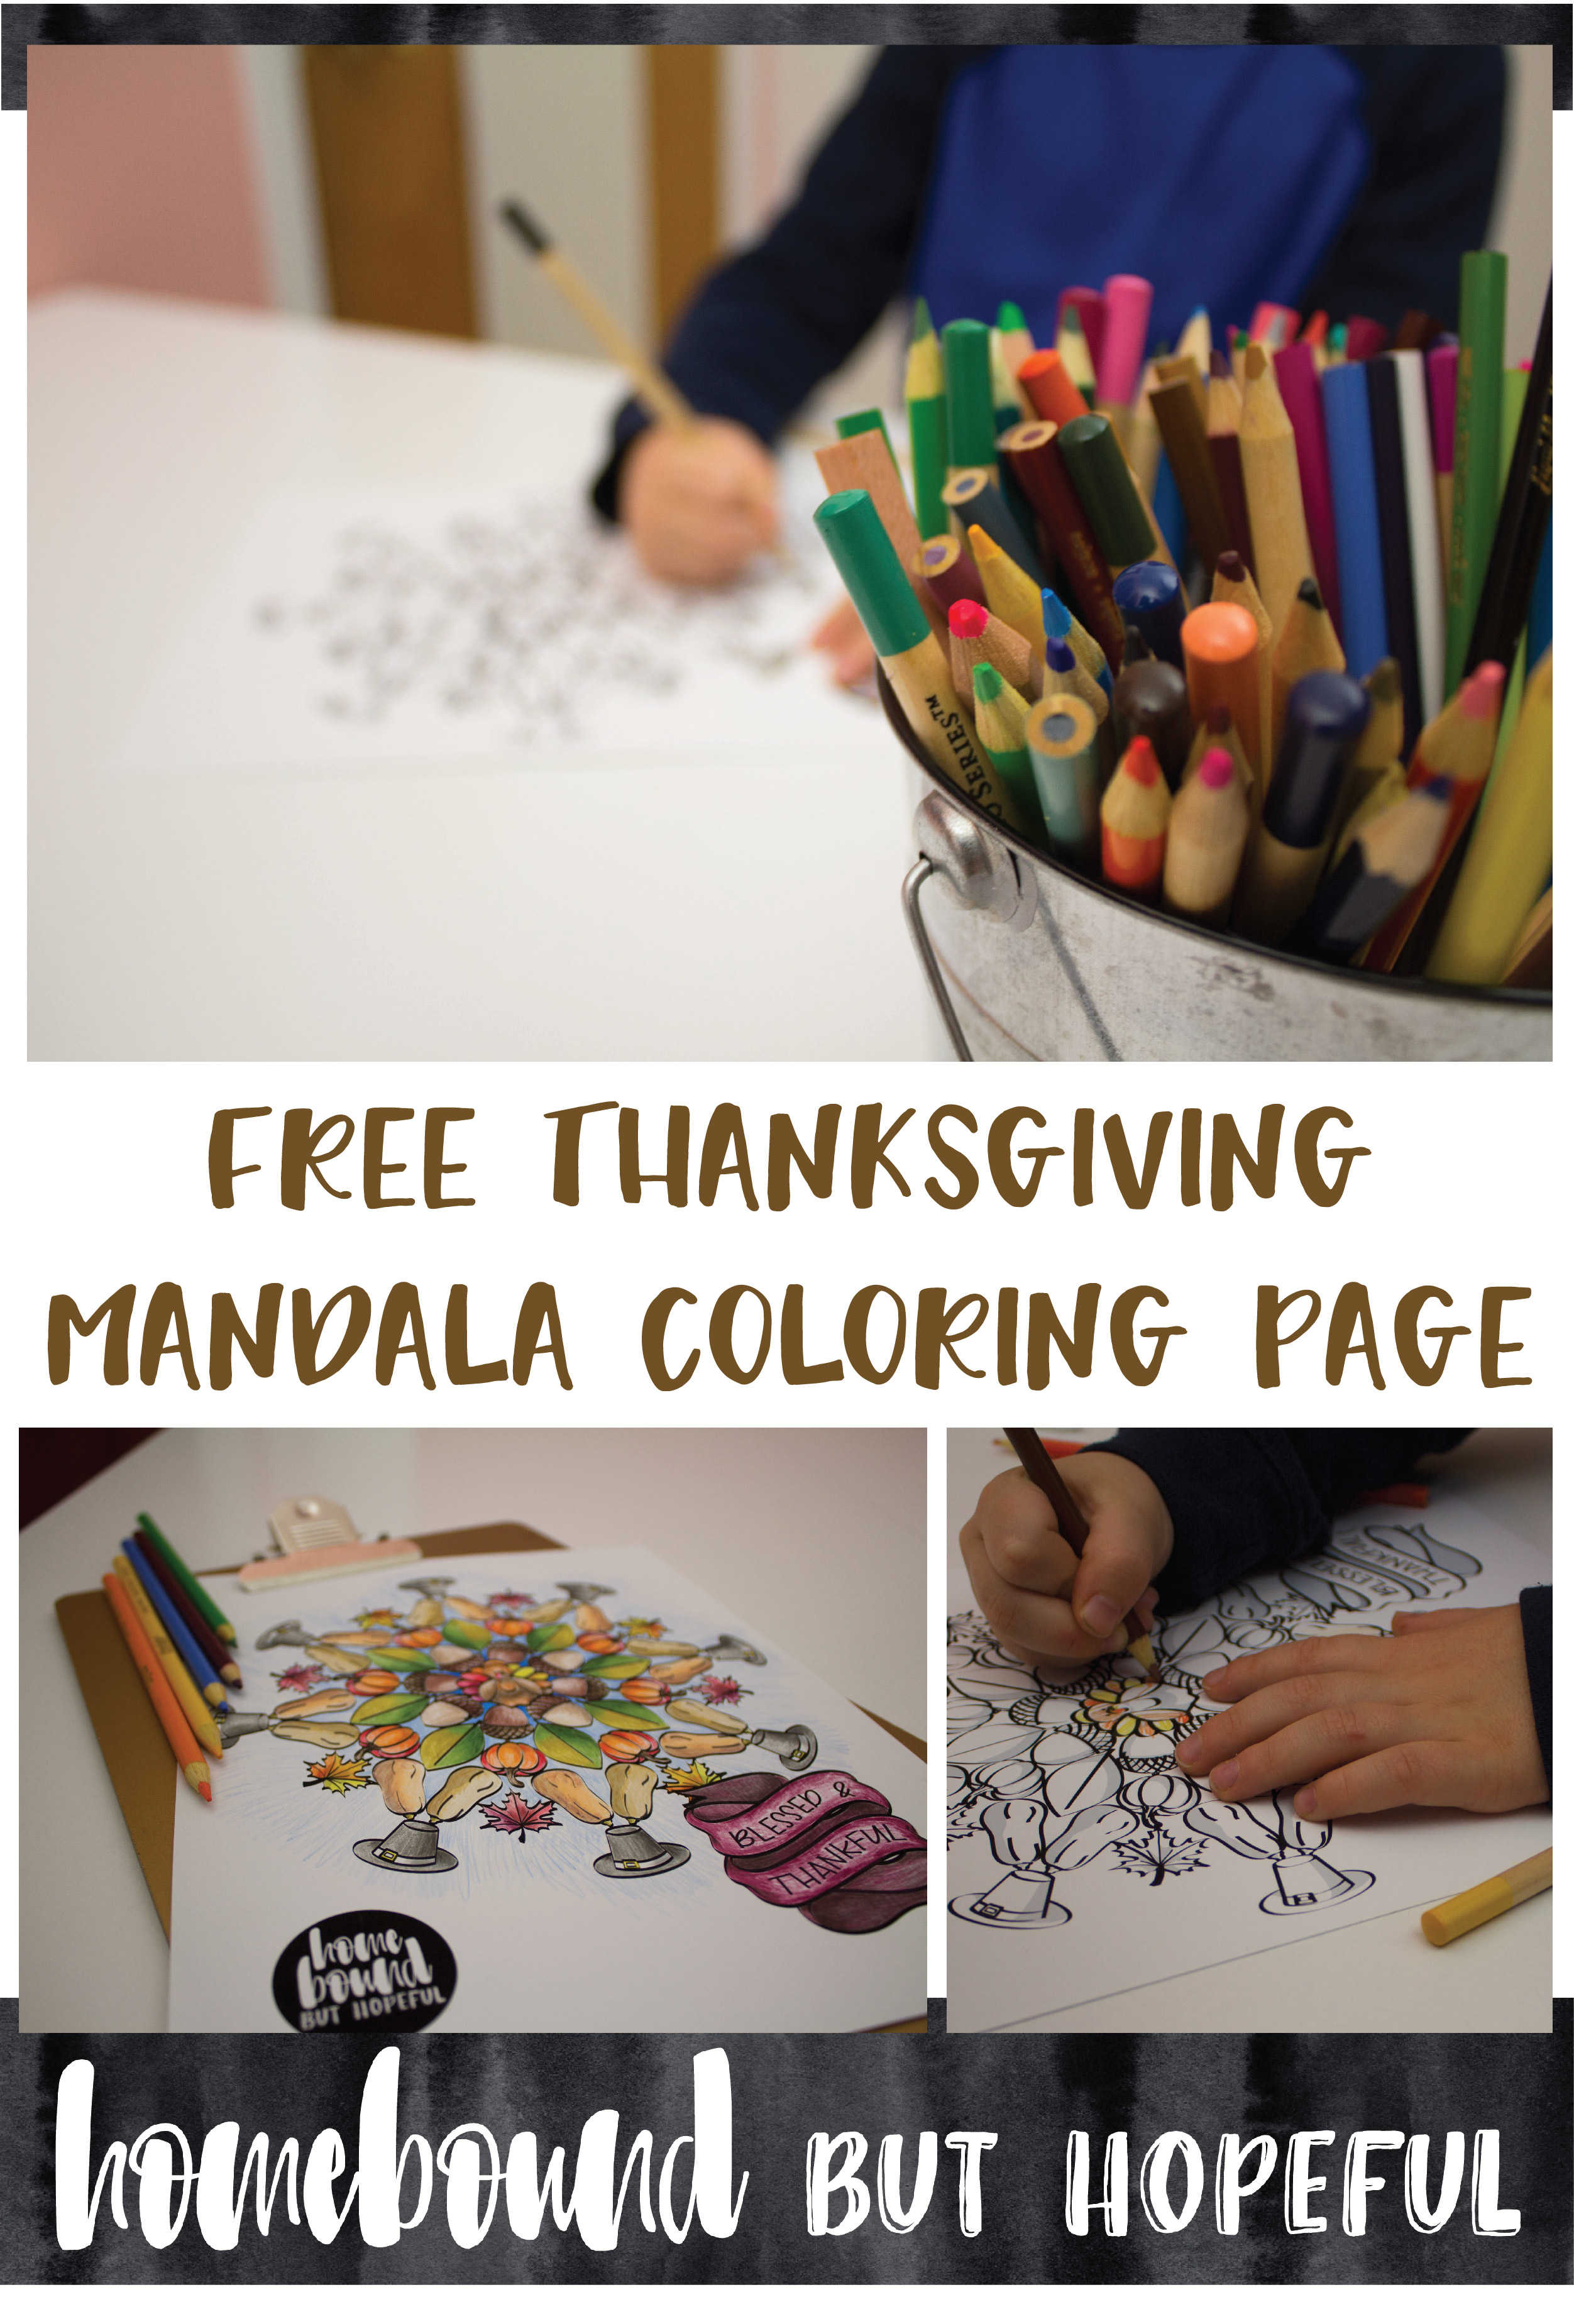 If you need a great way for all ages to de-stress this Thanksgiving, check out this free printable mandala. Intricate enough to keep adults engaged, but fun for kids to work on as well.